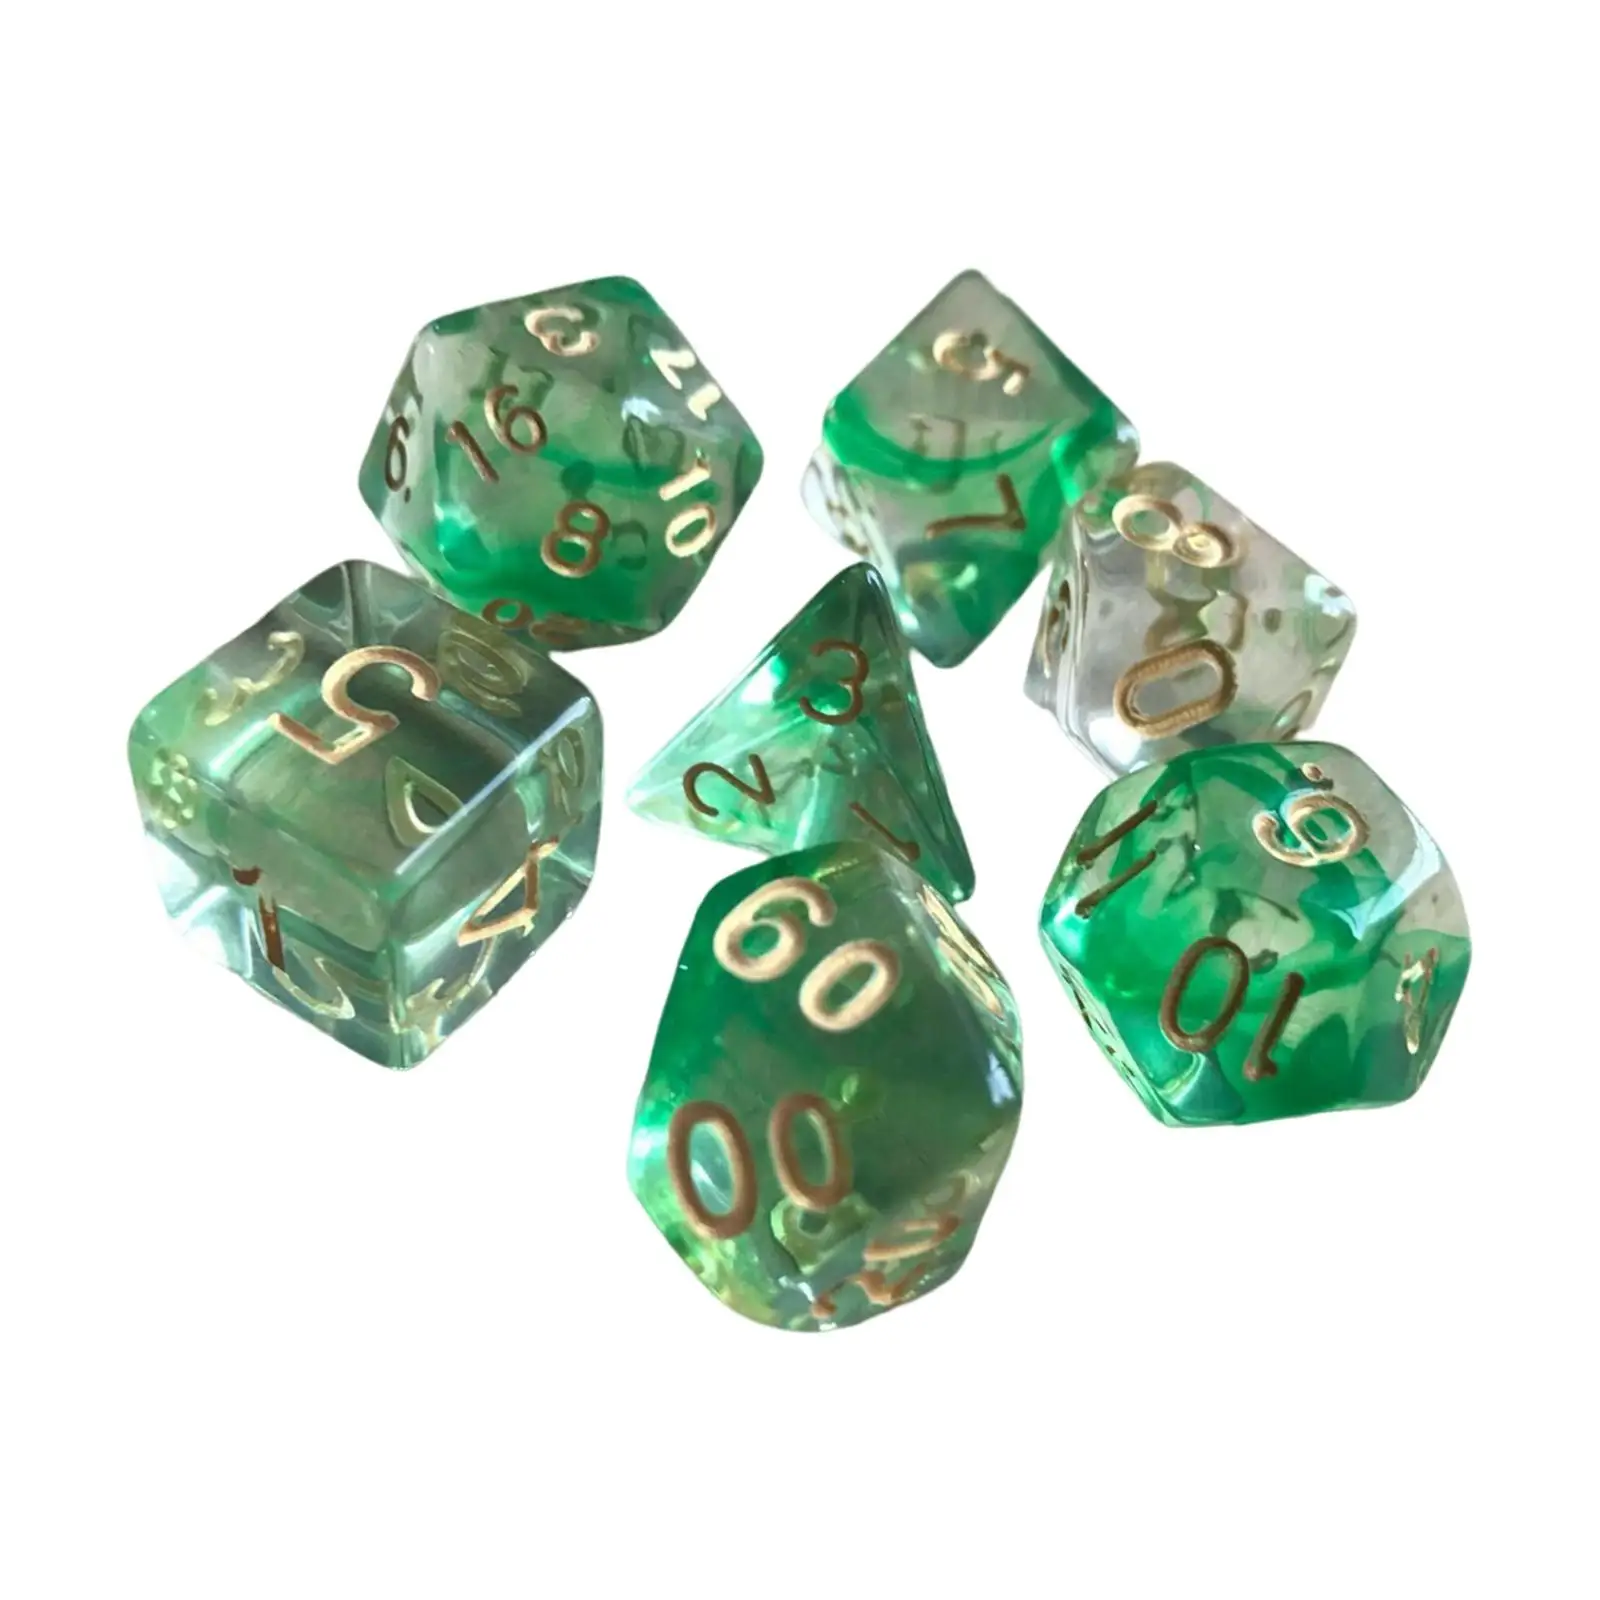 7x Polyhedral Dice D4 D6 D8 D10 D12  Game for Cafe Table Board Bar